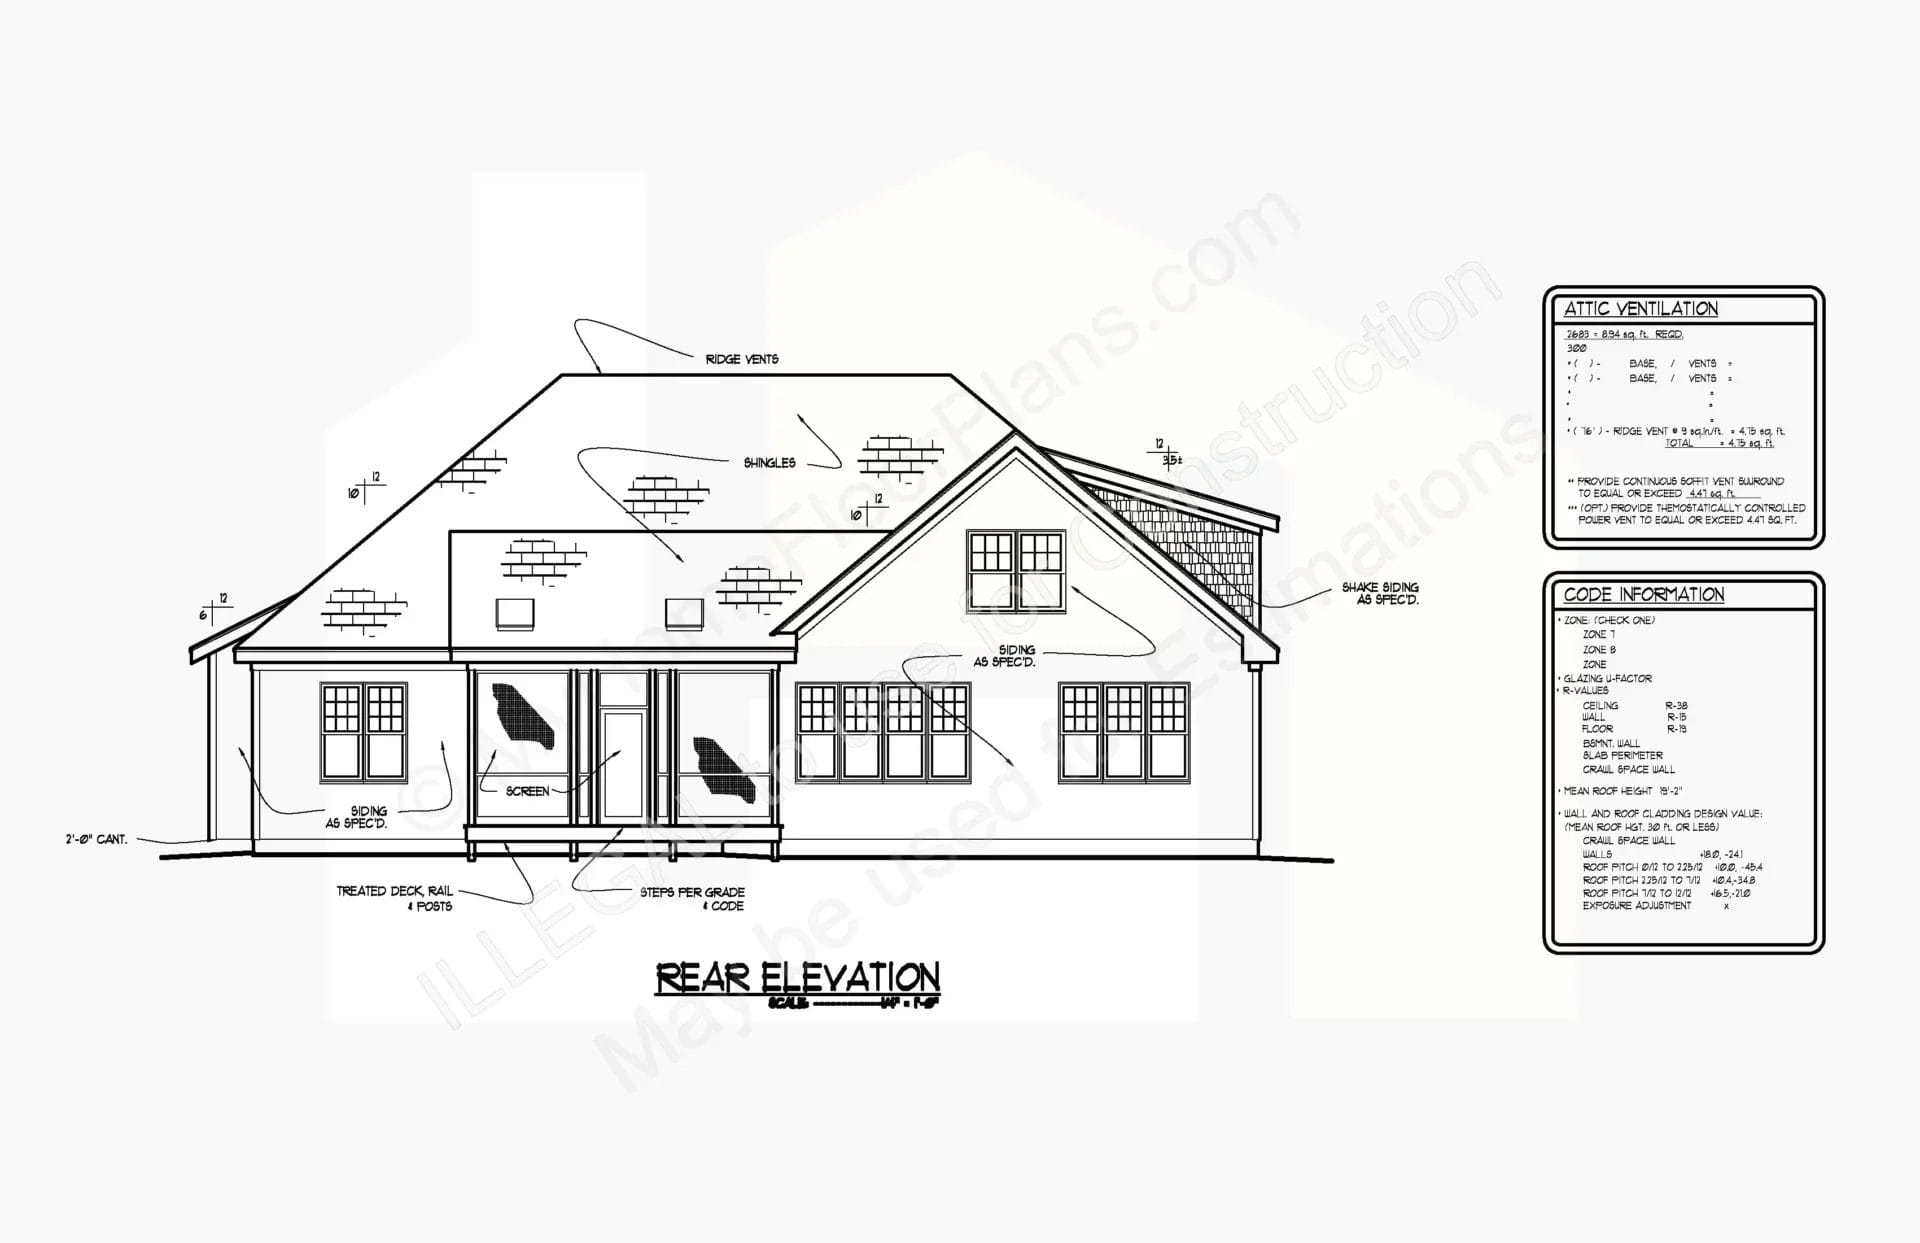 Architectural rear elevation blueprint of a two-story home showing detailed dimensions, window and door placements. Adjacent are tables with attic and soffit ventilation specifications for product 13-1336.